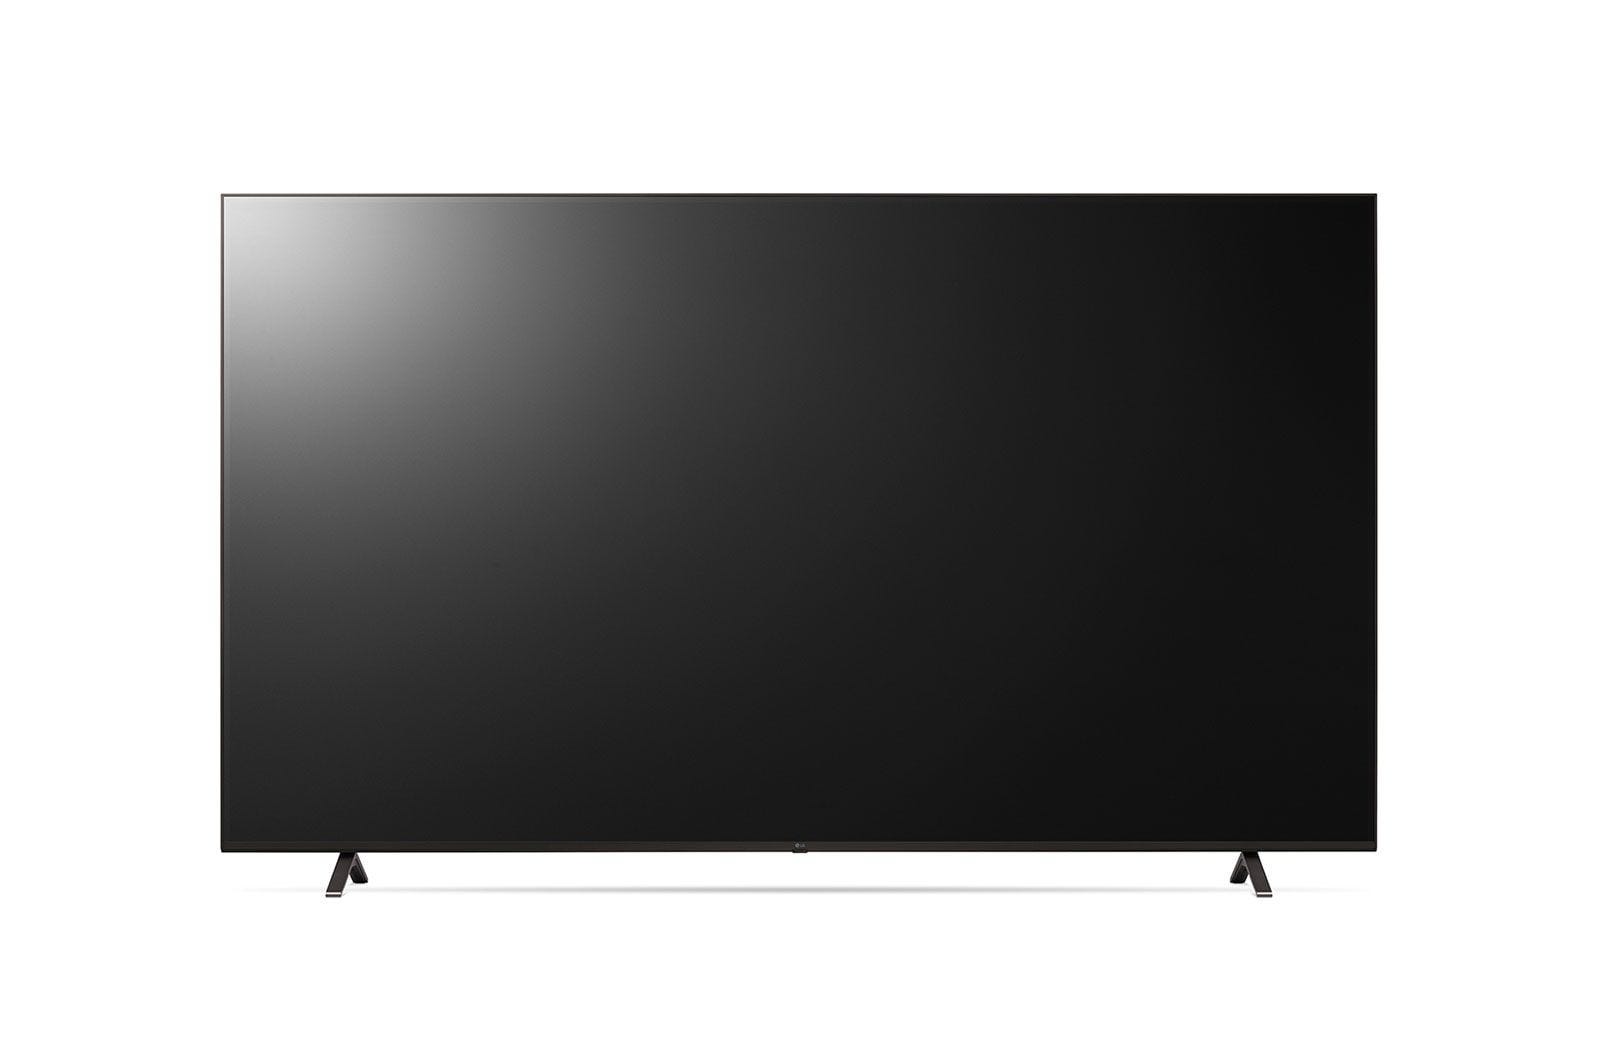 LG 86 Inch 4K UHD Smart LED TV with Built In Receiver - 86UR78006LC